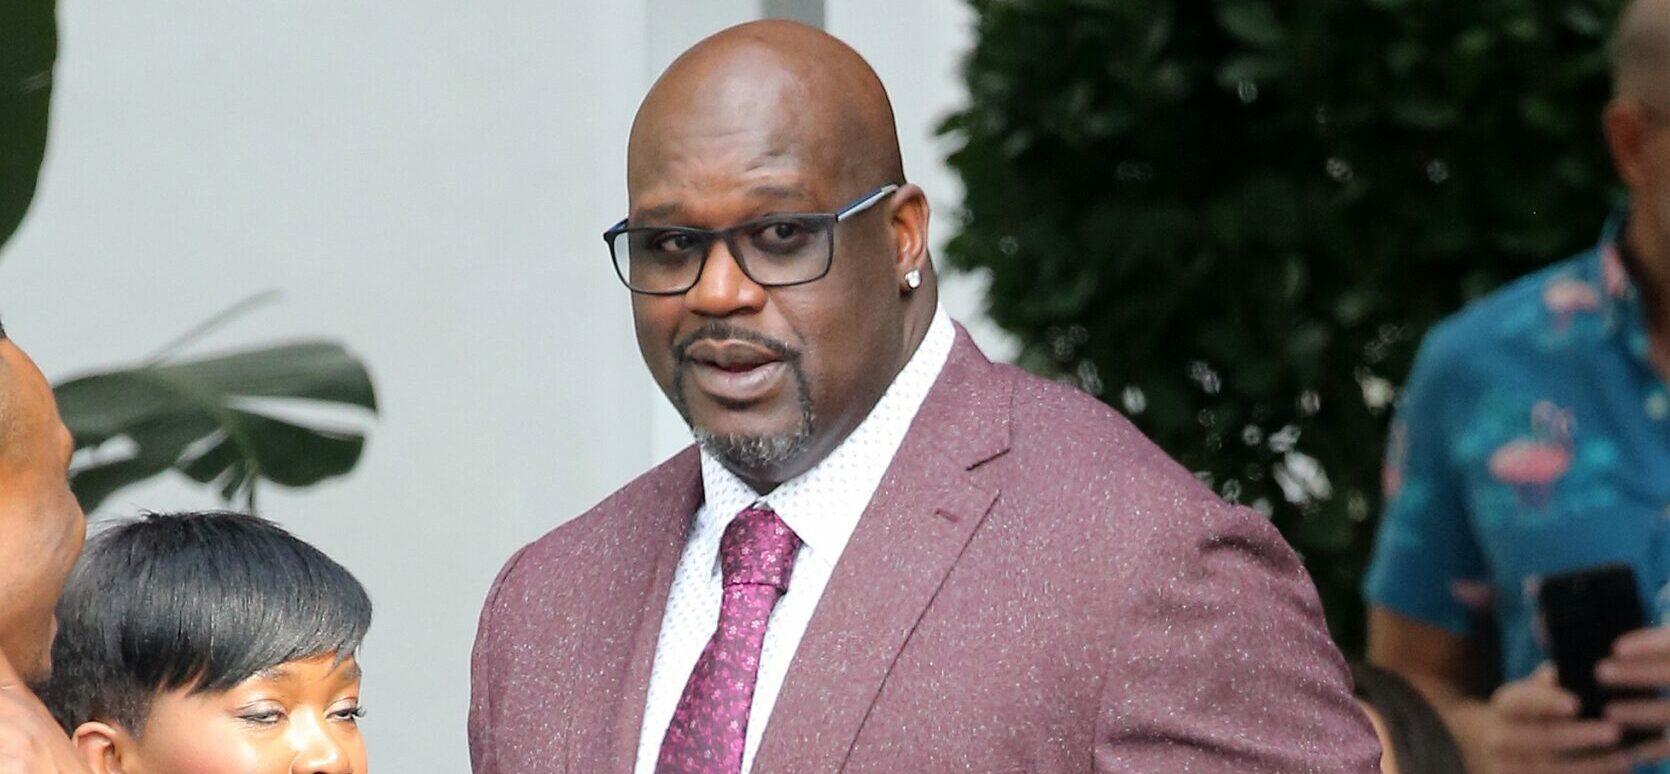 Is Shaq A ‘Flat Earther’ Or Is He Just Messing With Us?